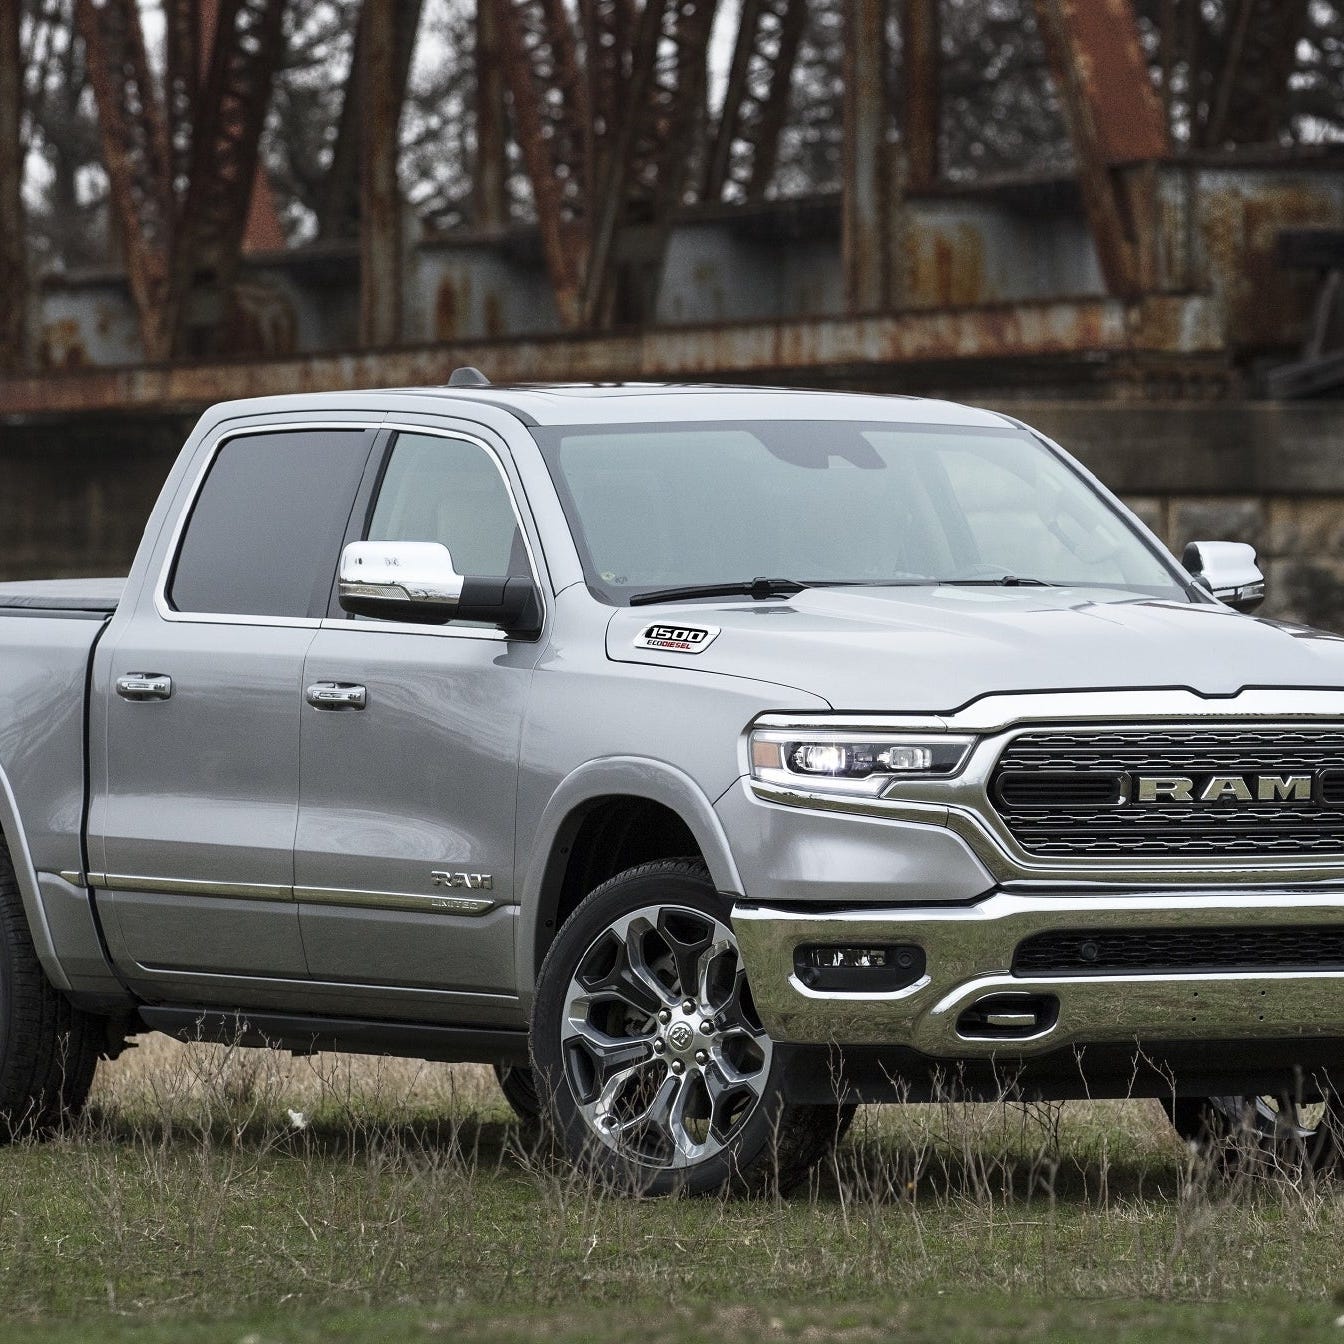 A silver 2021 Ram 1500 EcoDiesel, a full-size pickup truck.